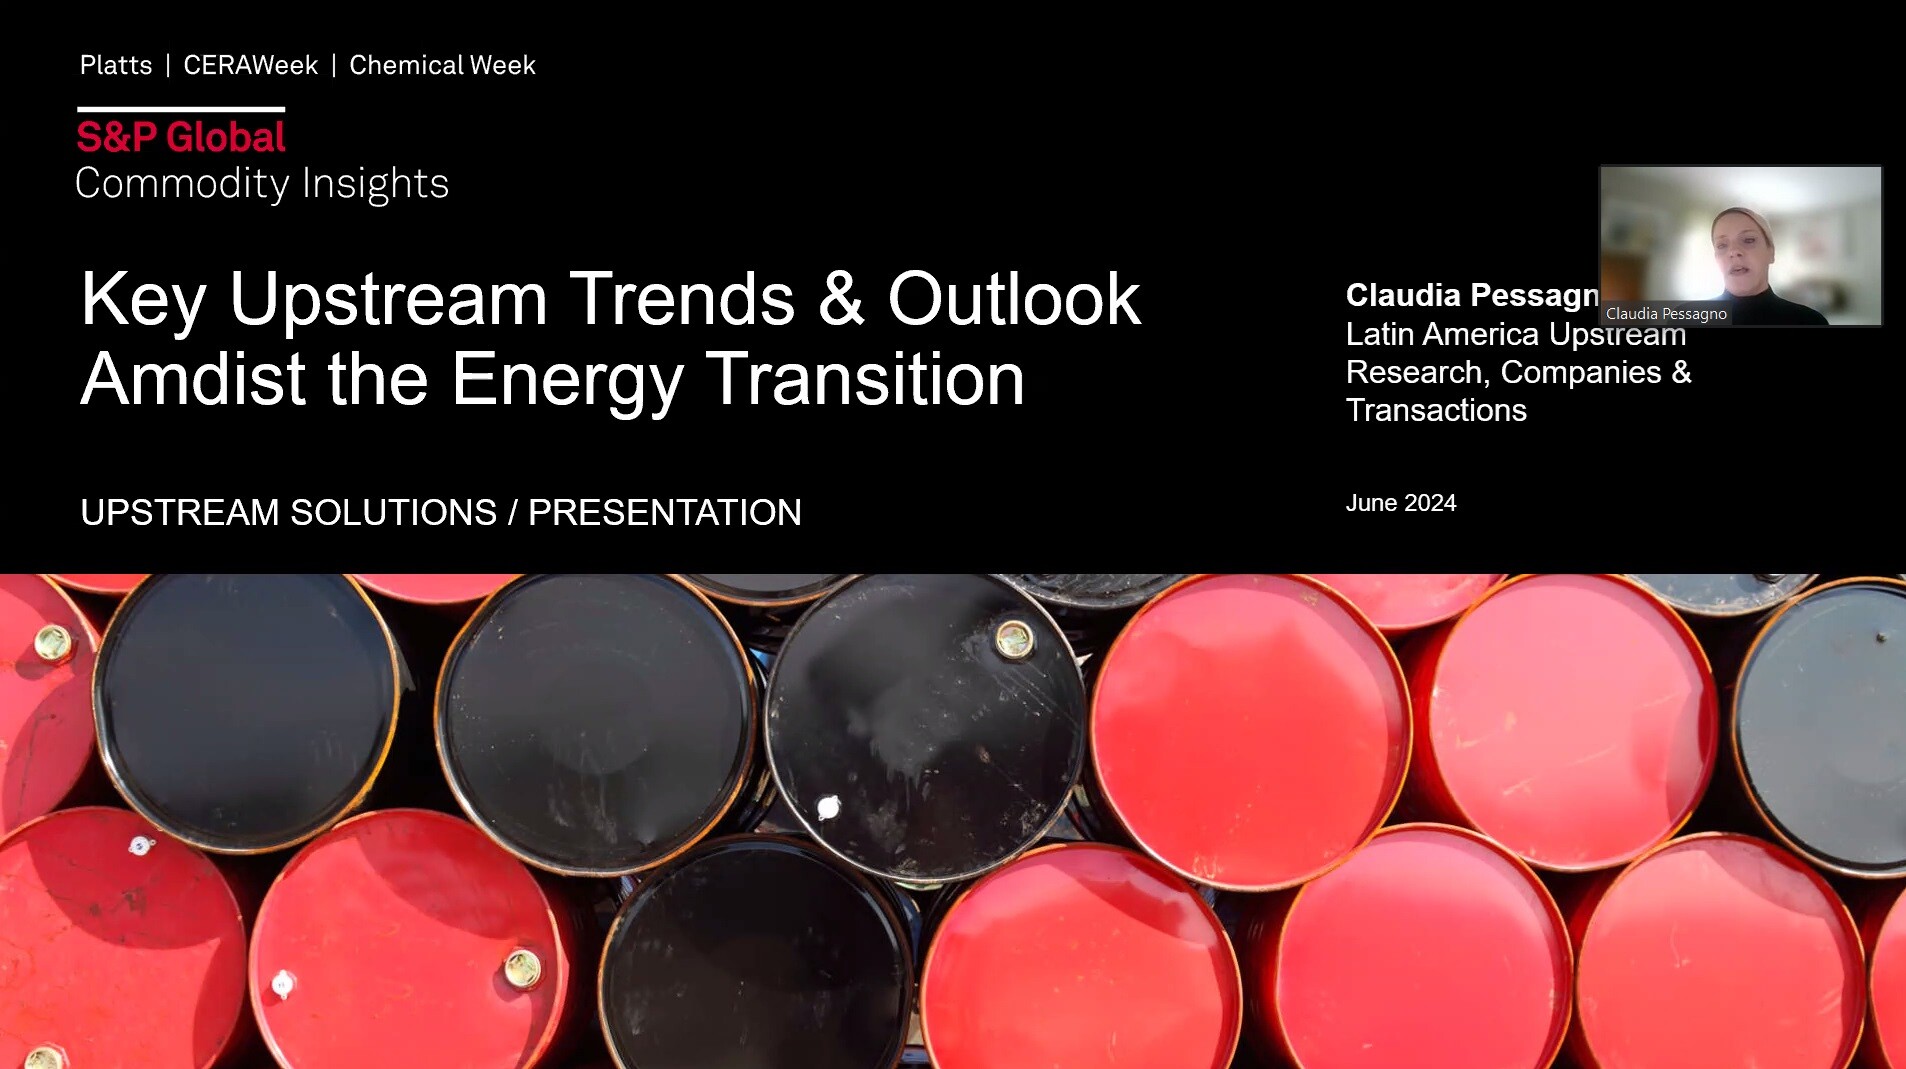 Webinar on Upstream Strategies for the Energy Transition by S&P Global